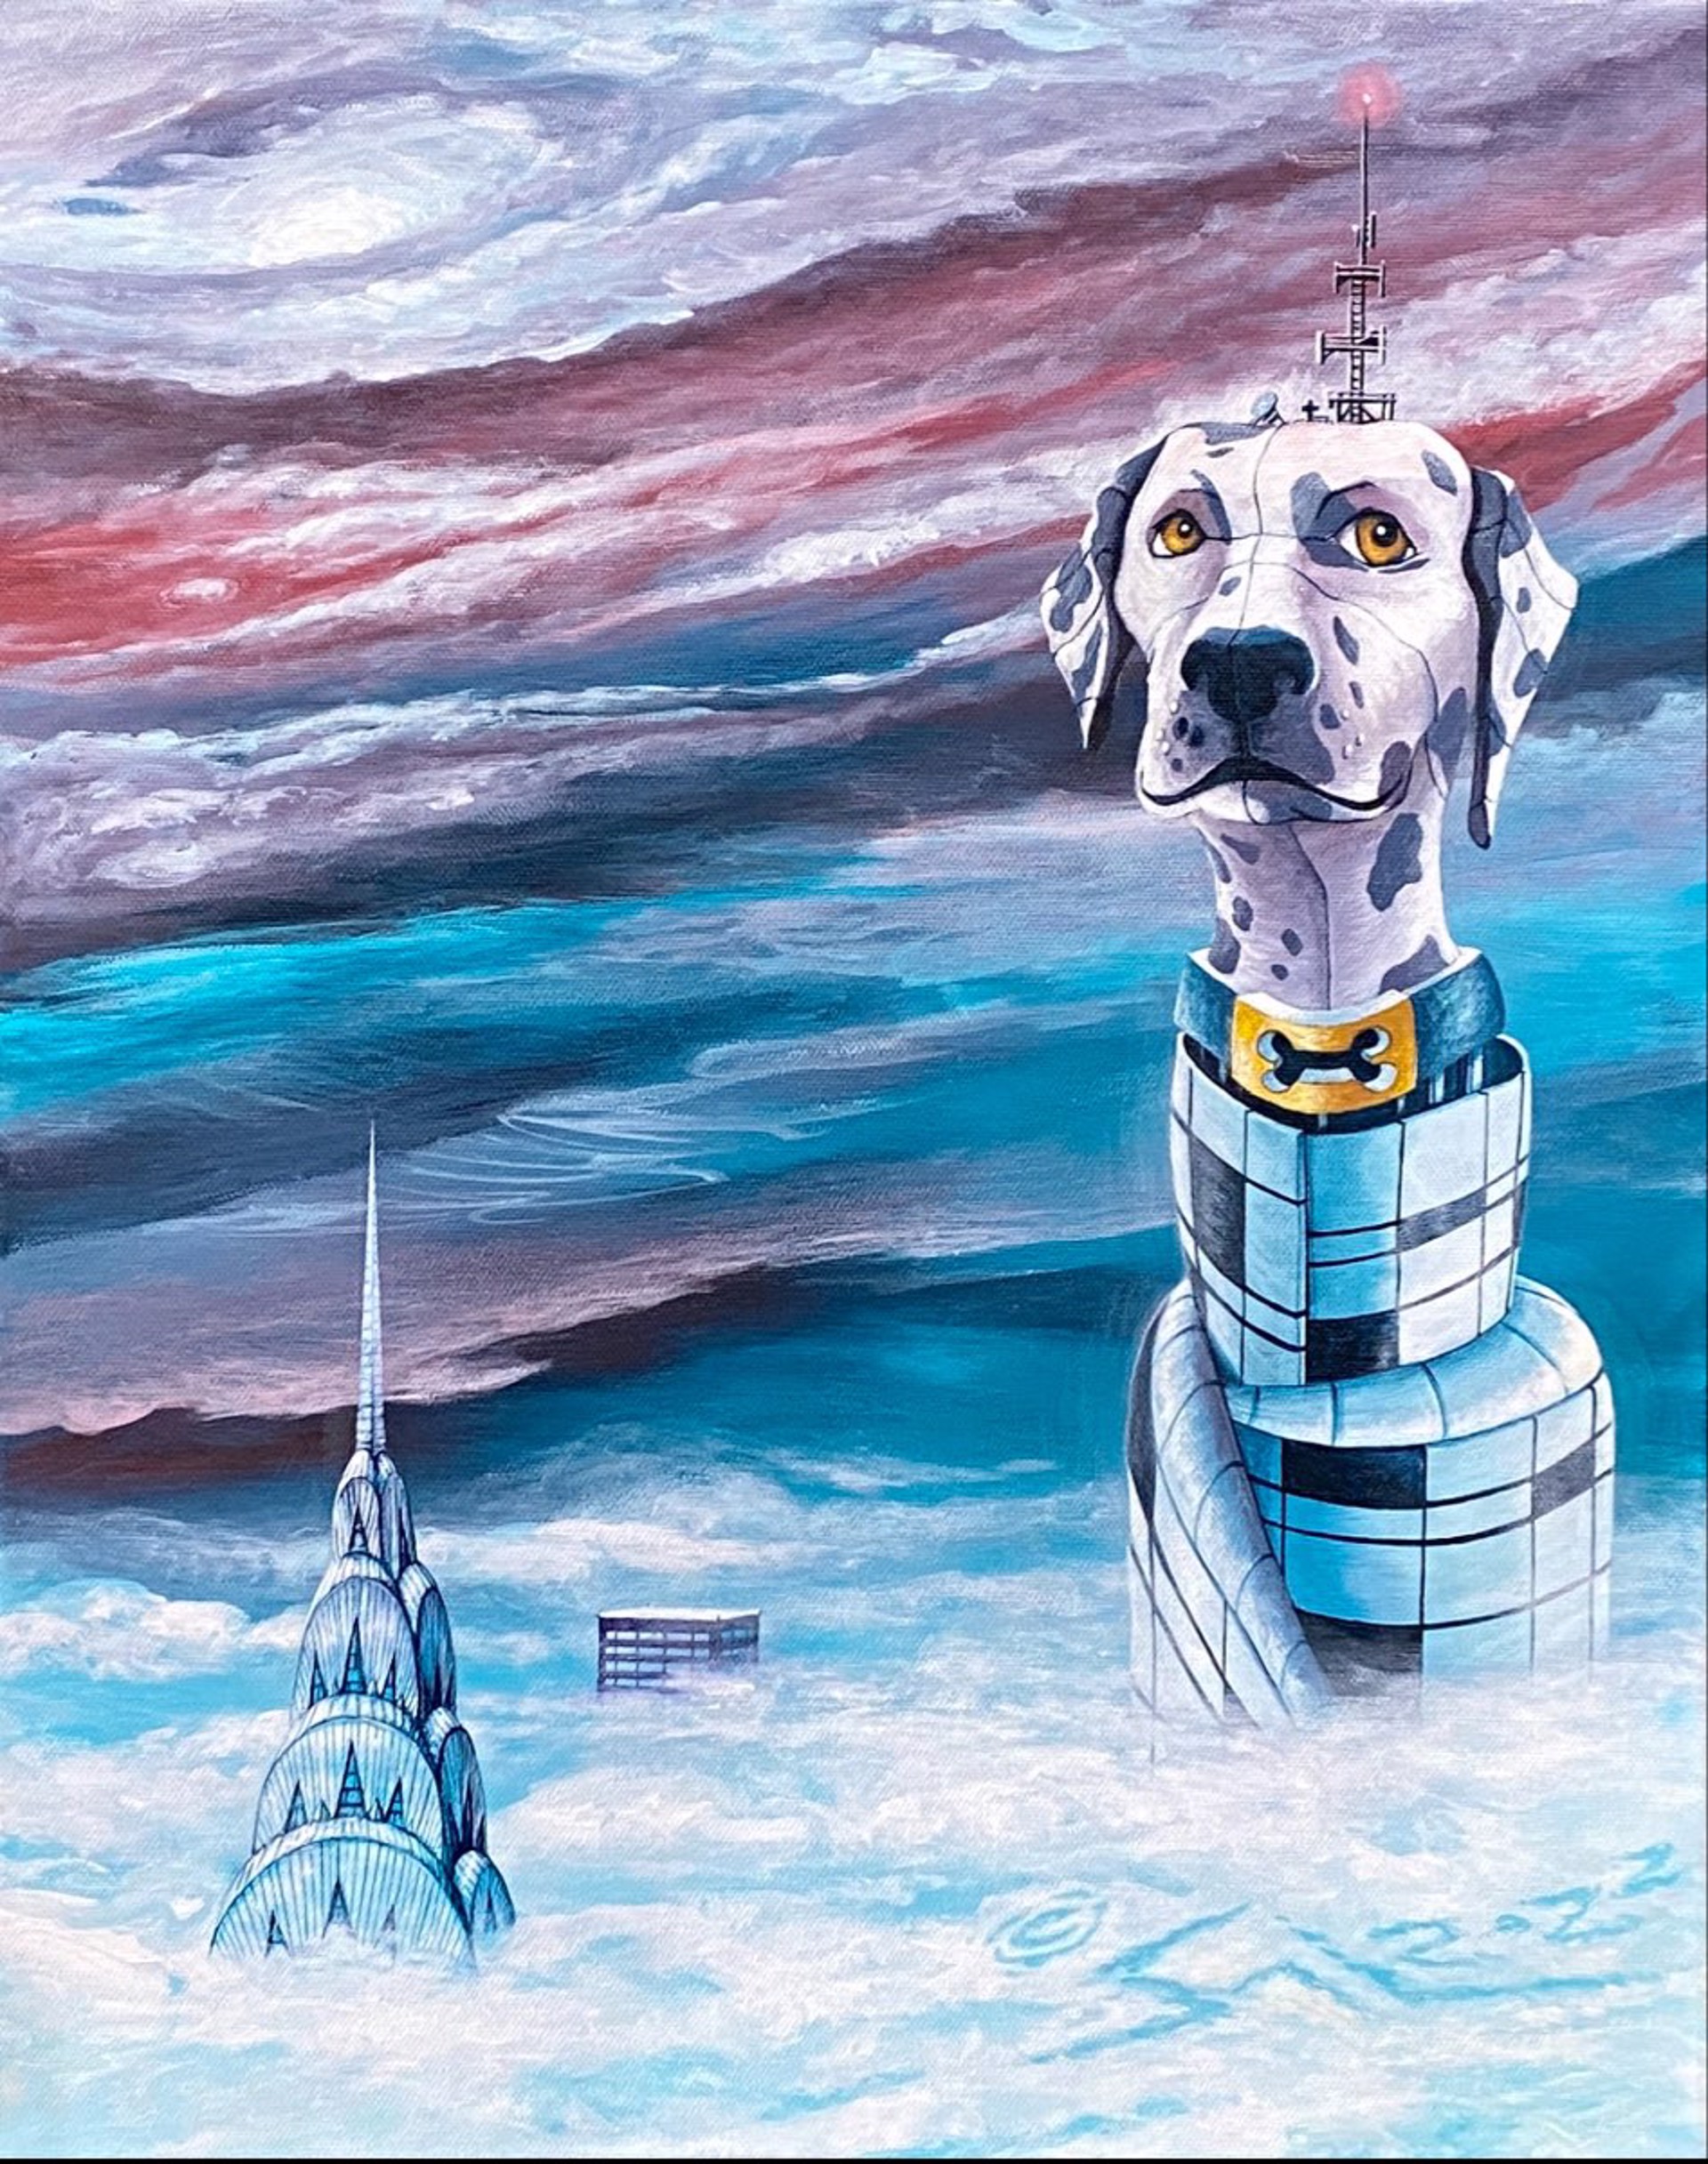 "Towering Pongo" by Sal Cosenza by Art One Foundation